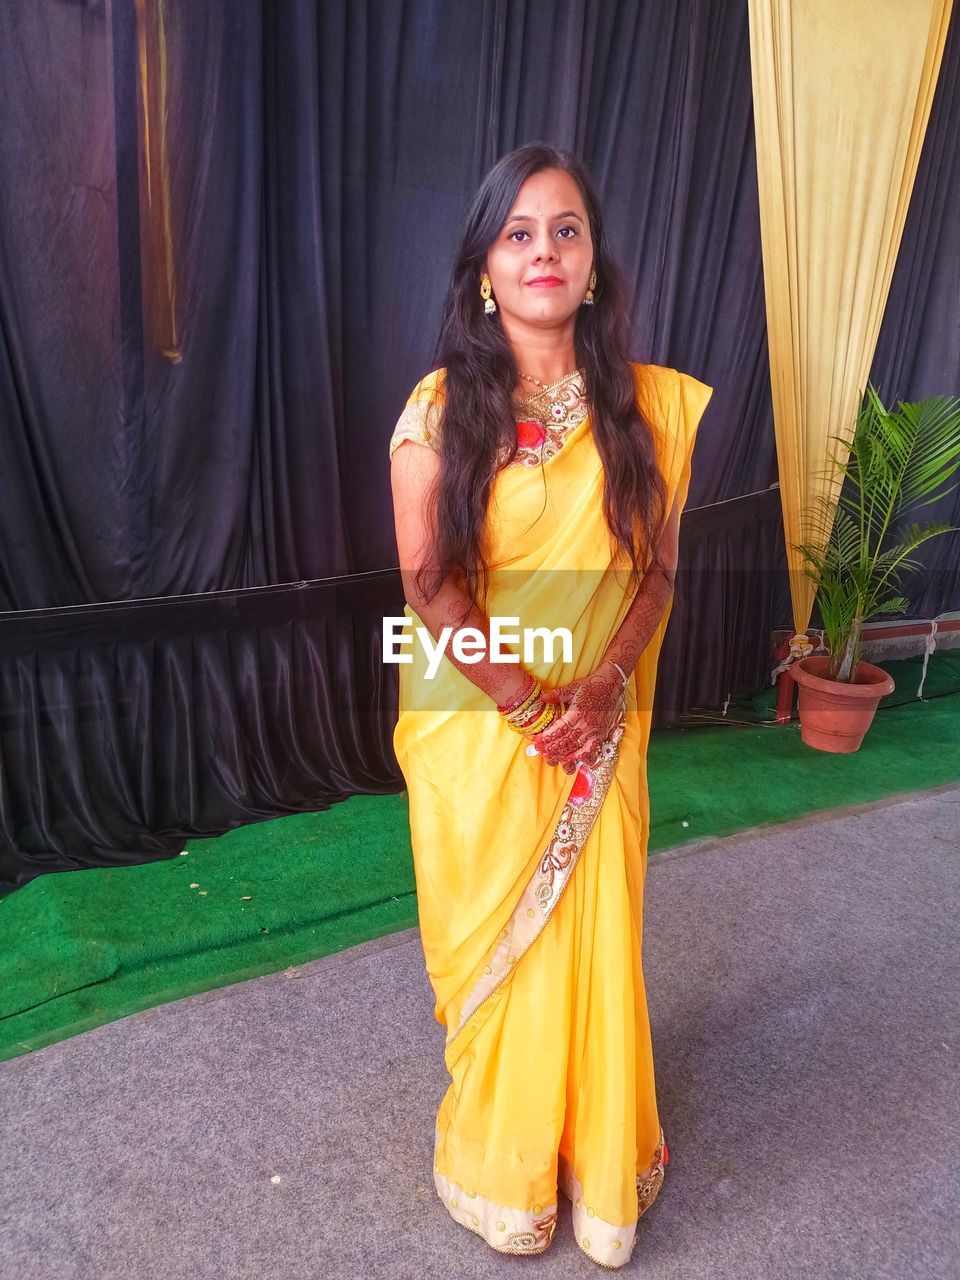 yellow, one person, clothing, adult, women, portrait, young adult, smiling, full length, looking at camera, traditional clothing, fashion, dress, standing, arts culture and entertainment, front view, happiness, curtain, long hair, sari, lifestyles, hairstyle, architecture, emotion, brown hair